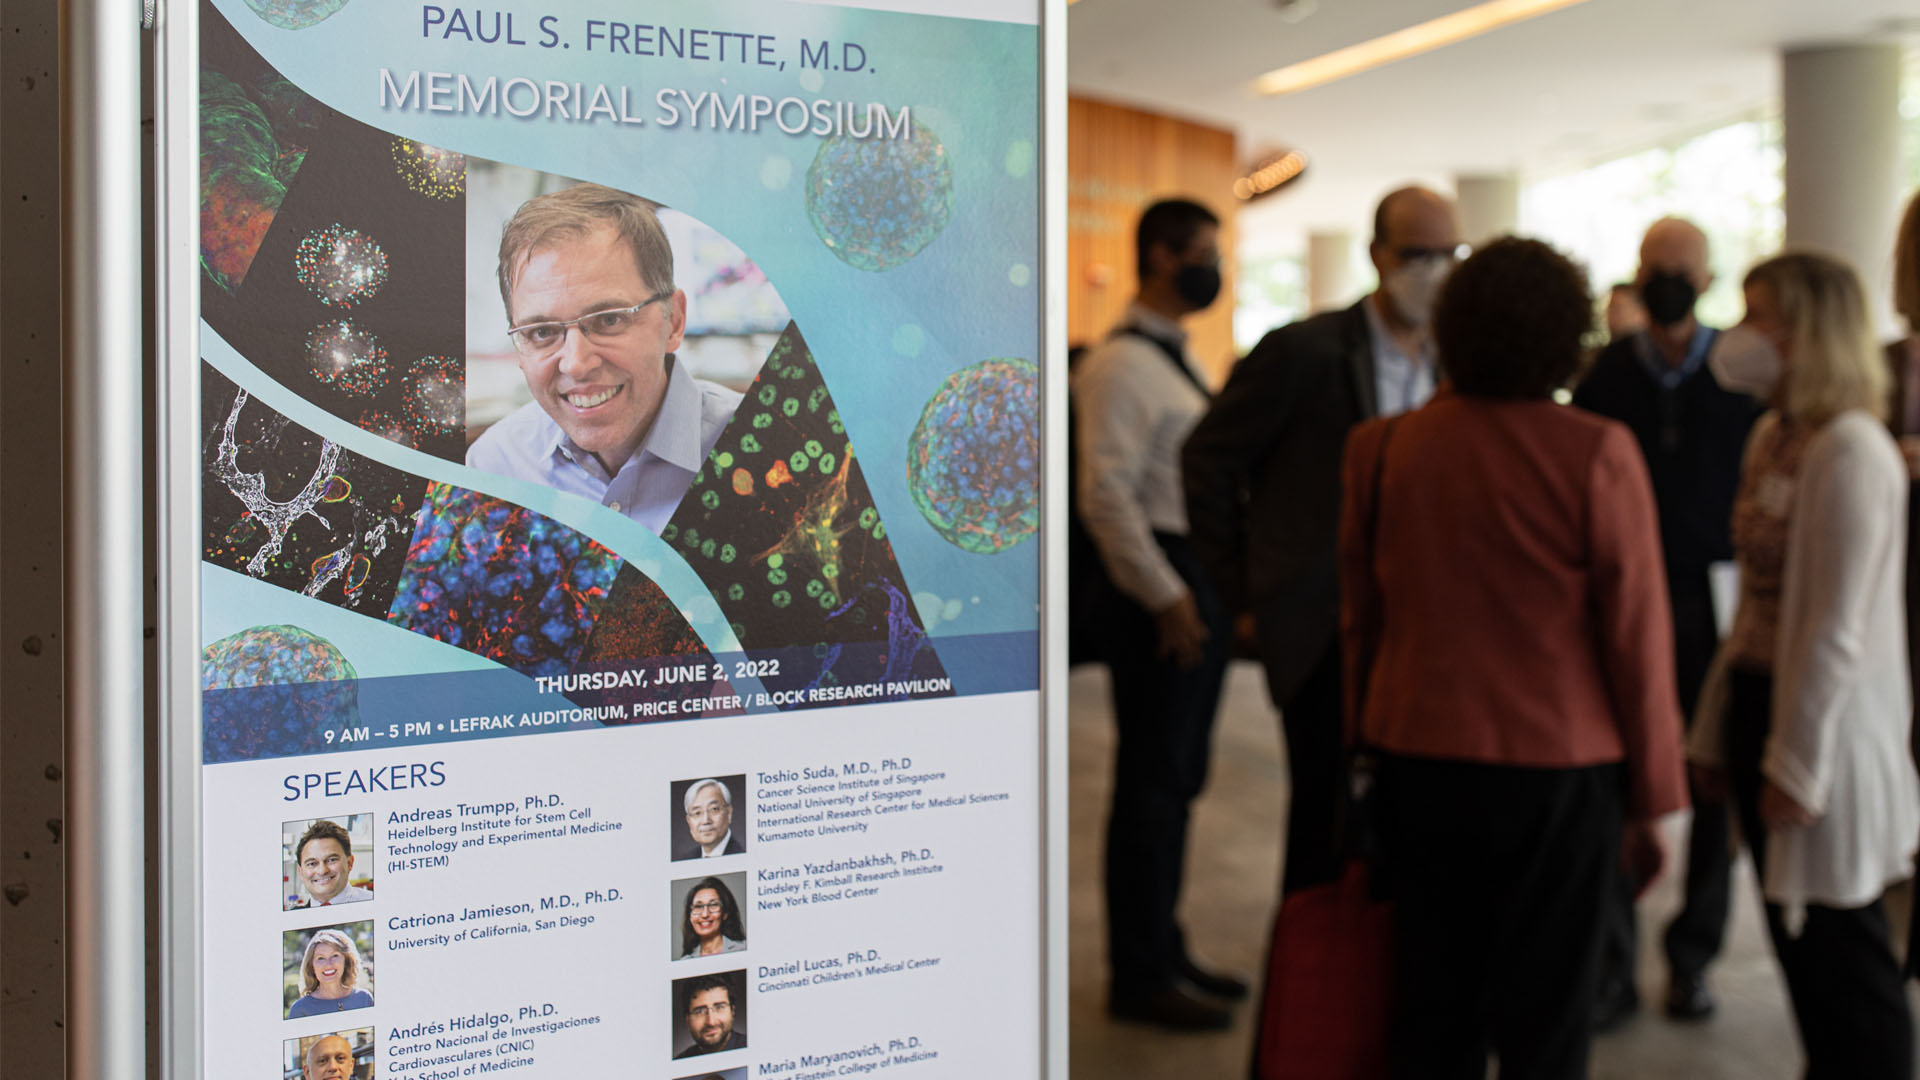 Scientists Pay Tribute to Pioneering Researcher Paul Frenette, M.D.